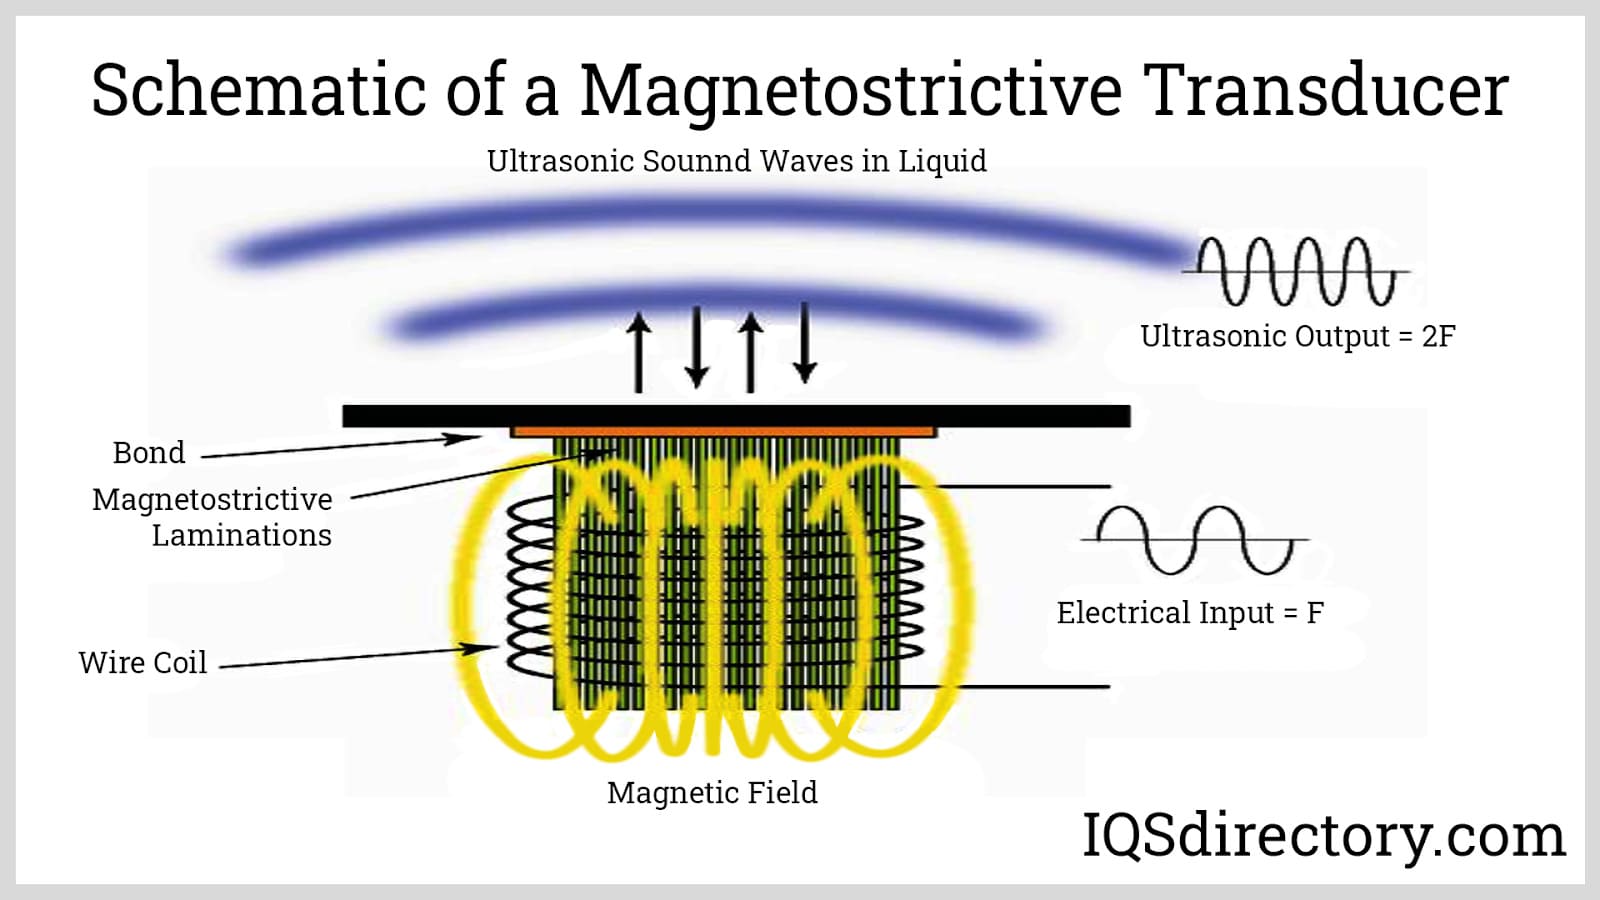 Schematic of a Magnetostrictive Transducer